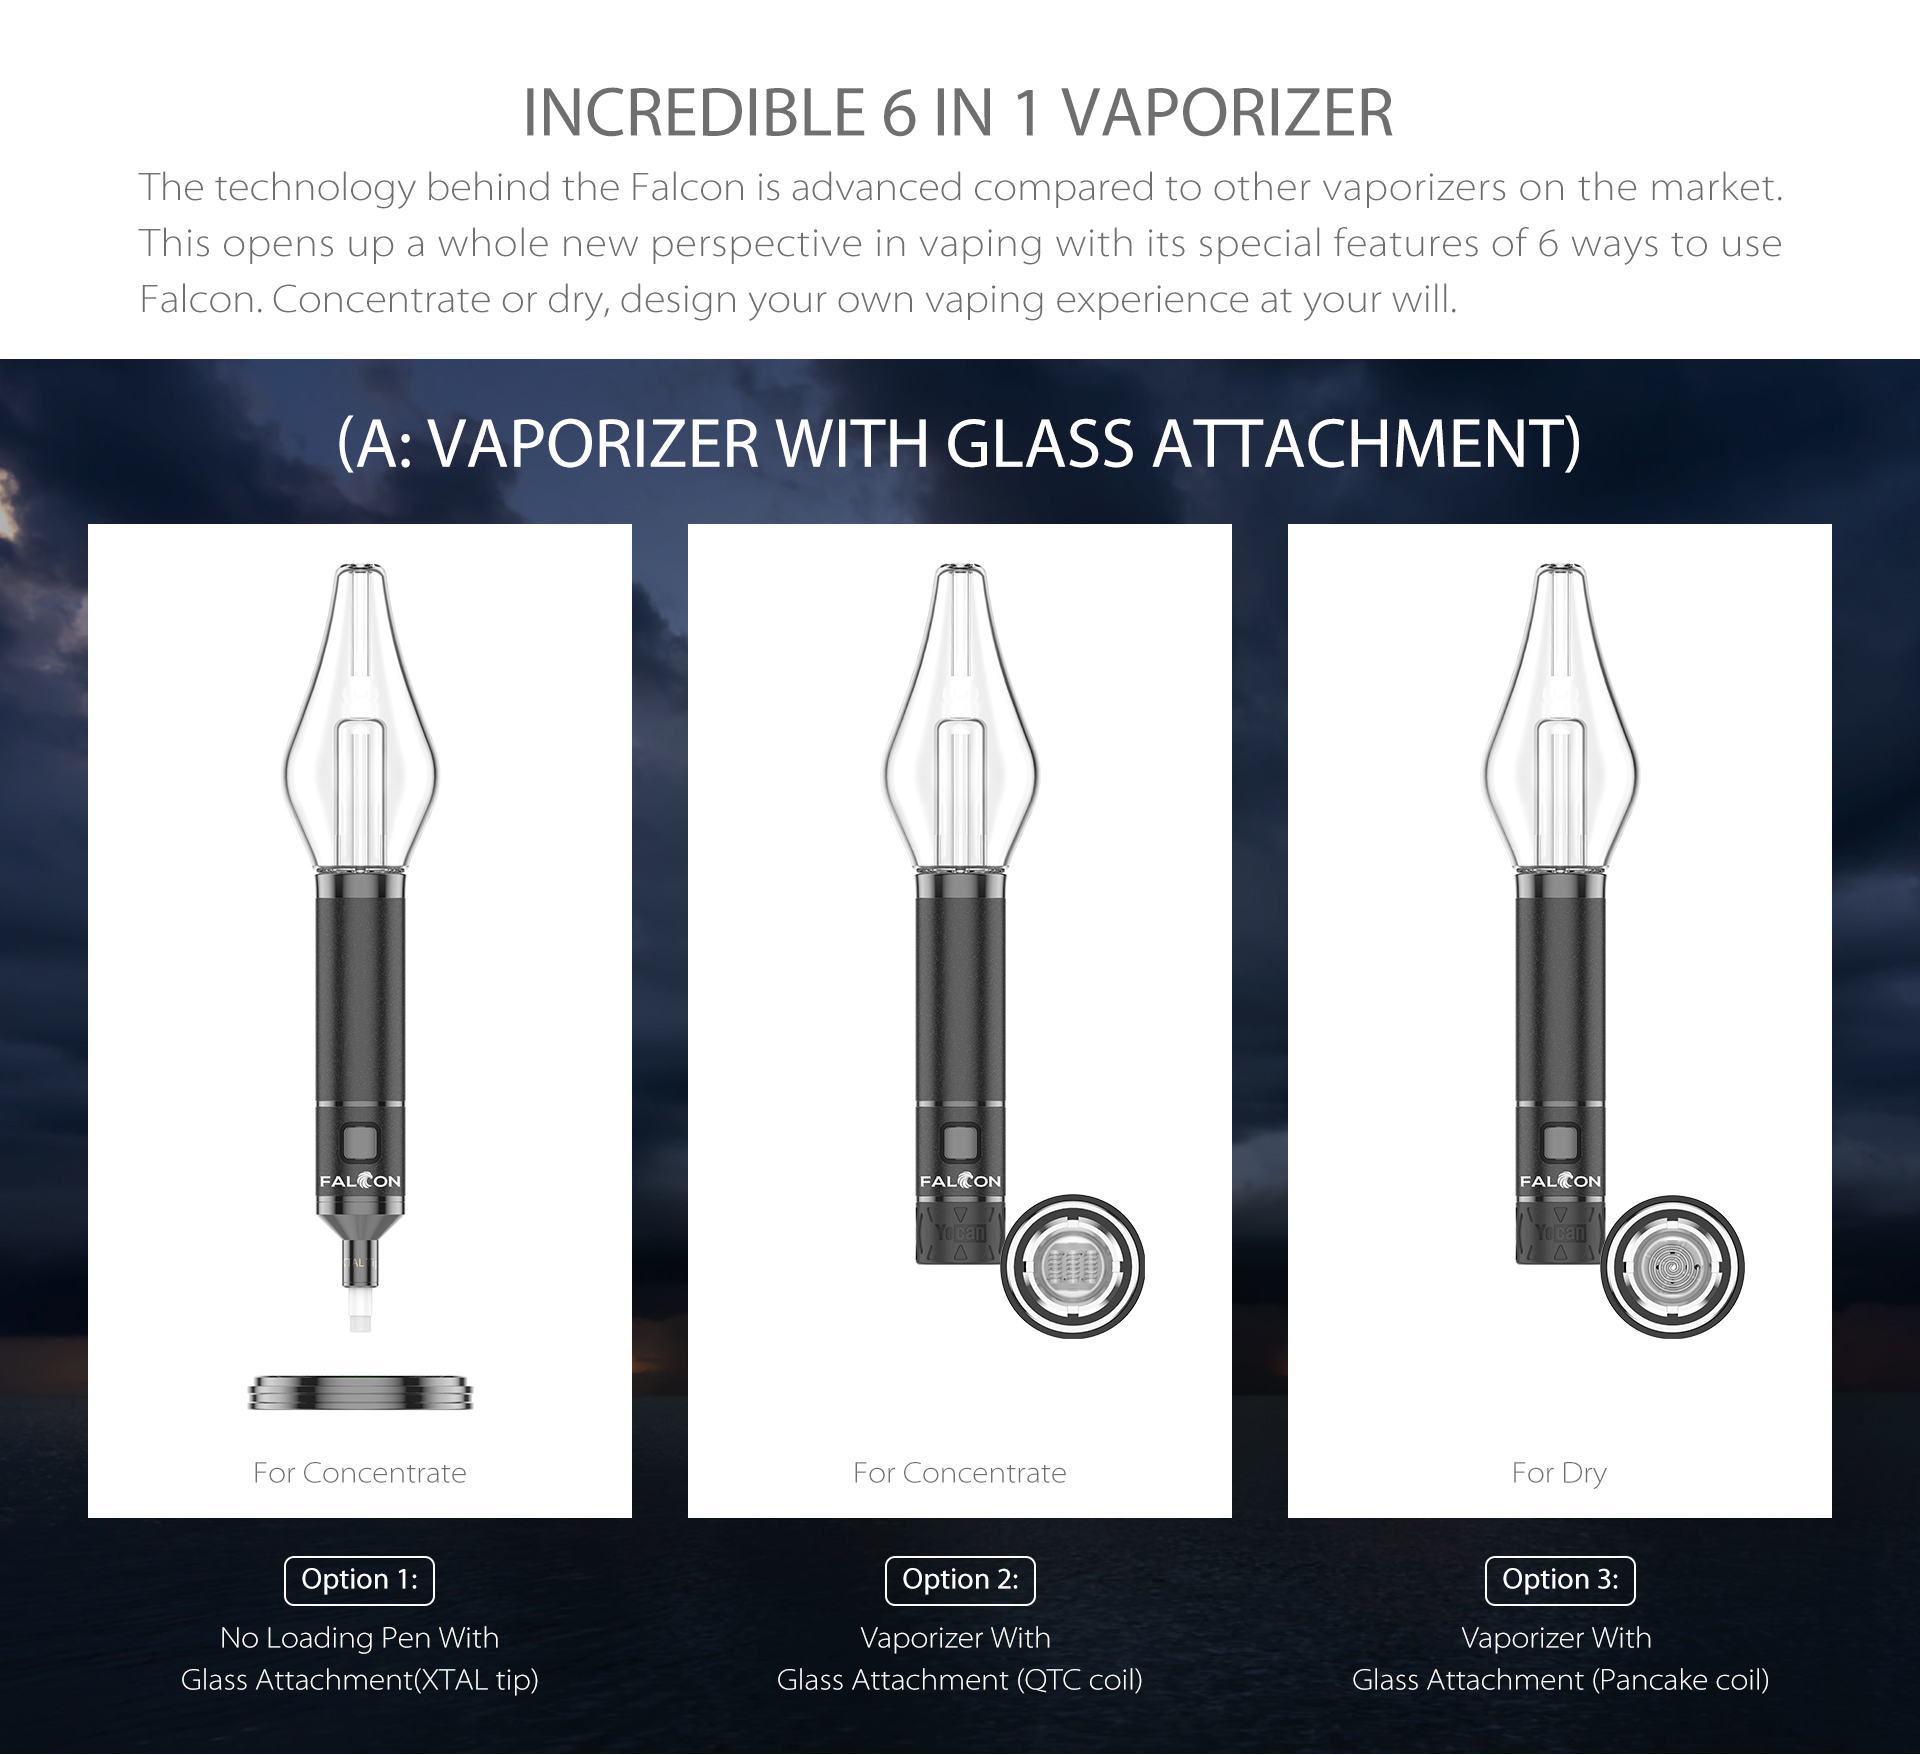 This opens up a whole new perspective in vaping with its special features of 6 ways to use Falcon.